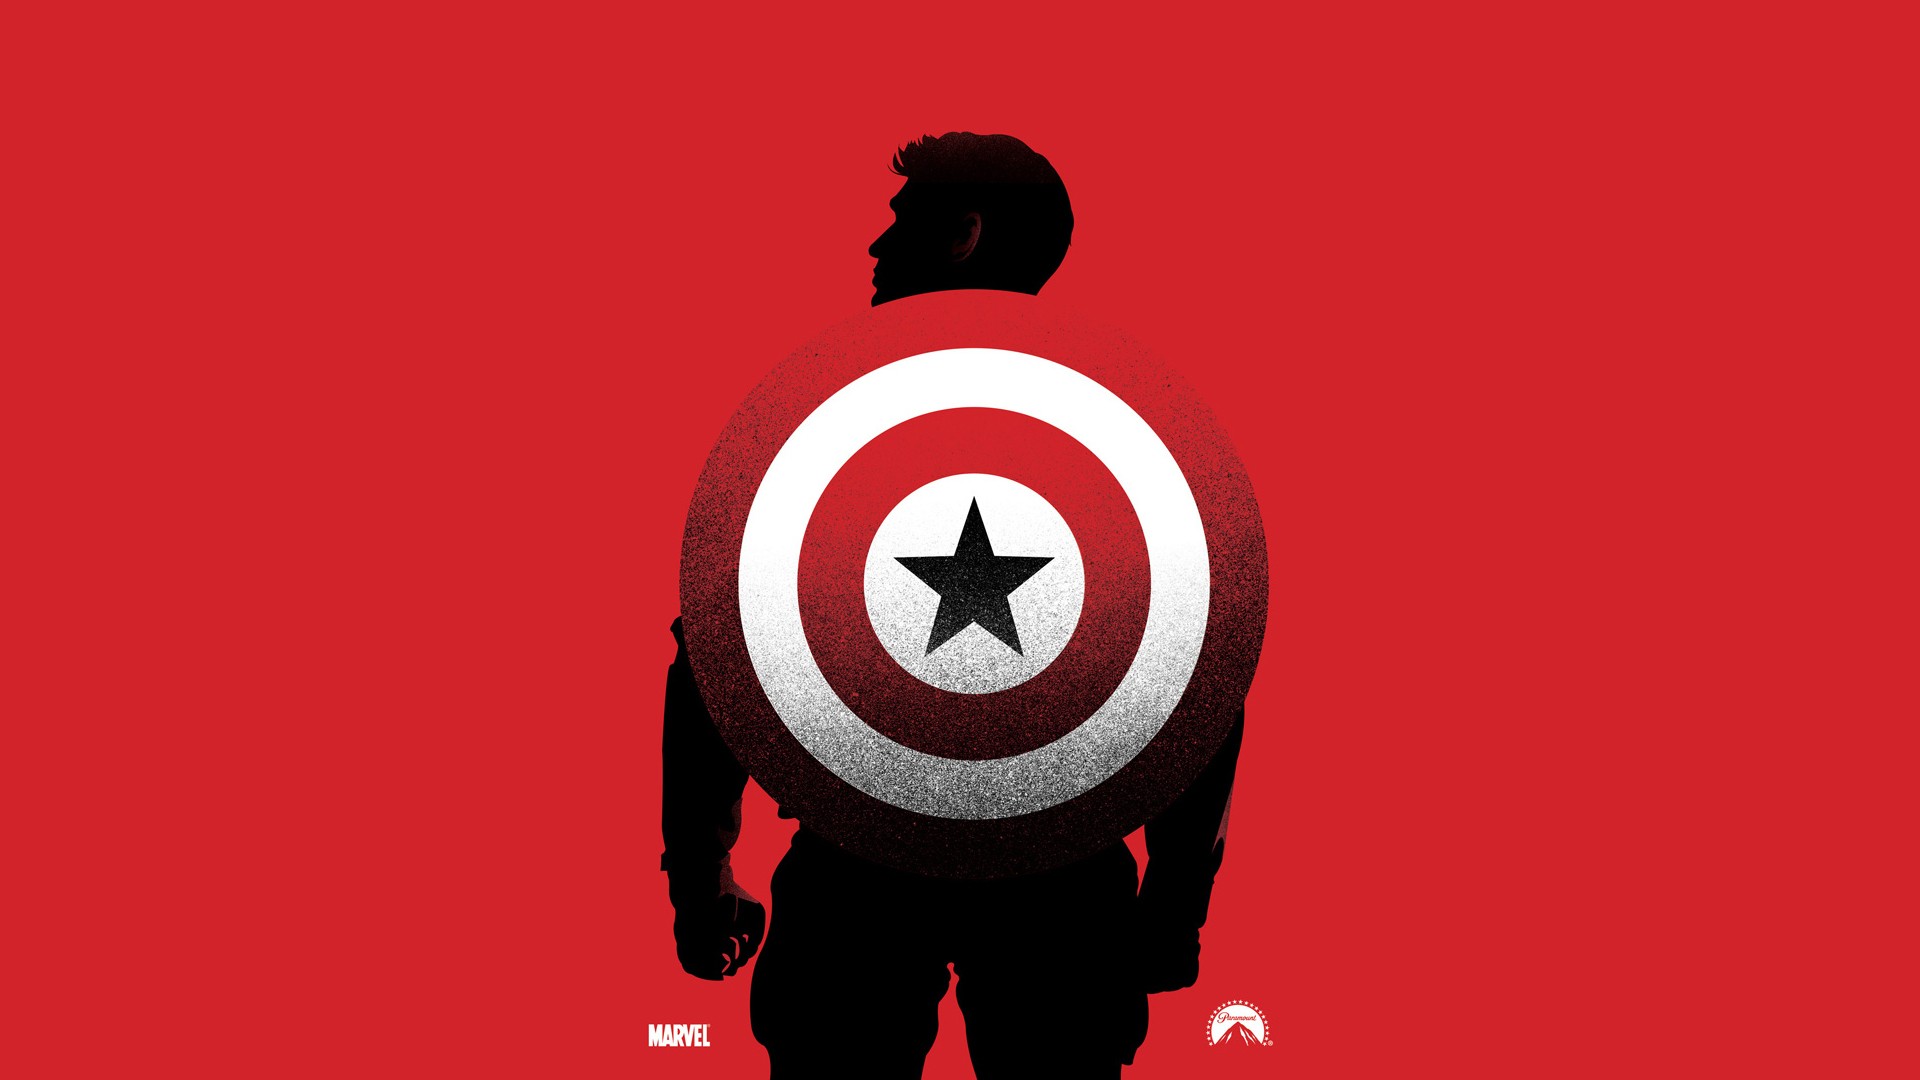 General 1920x1080 Captain America movies superhero Marvel Cinematic Universe red background simple background silhouette shield men Paramount